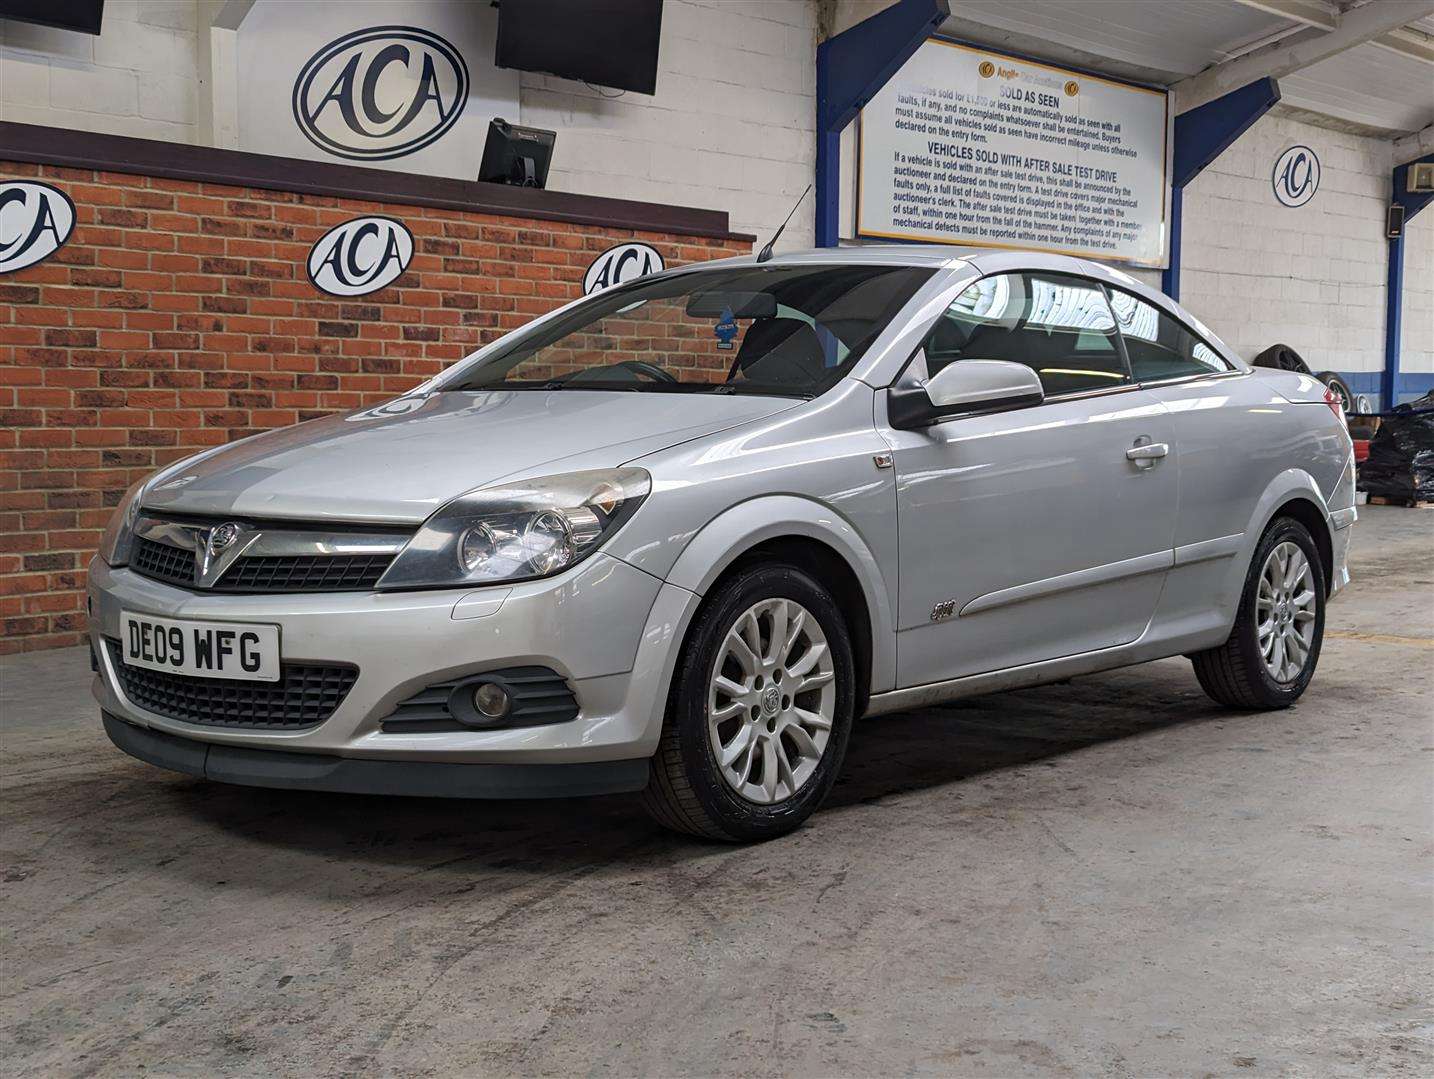 2009 VAUXHALL ASTRA TWINTOP SPORT